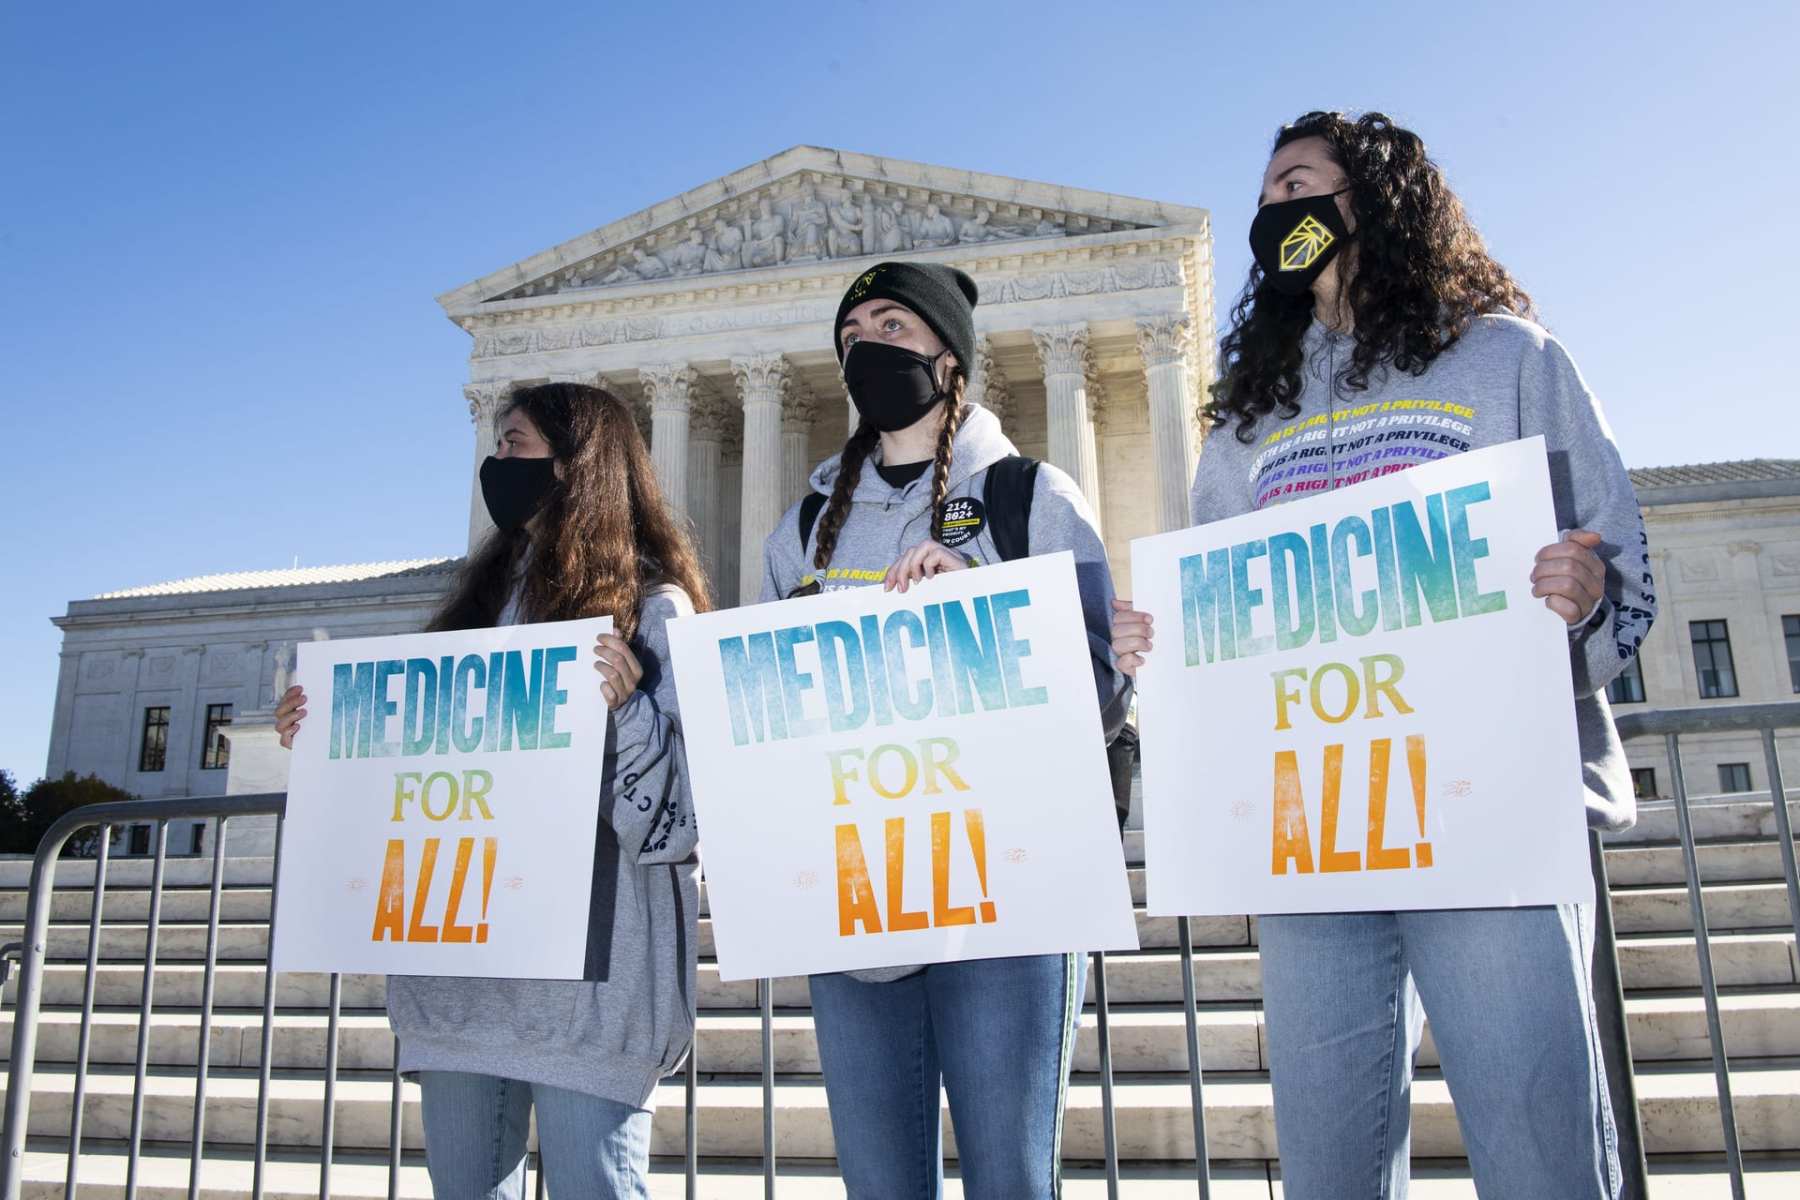 A group of people stand with signs that read "Medicine For All!"